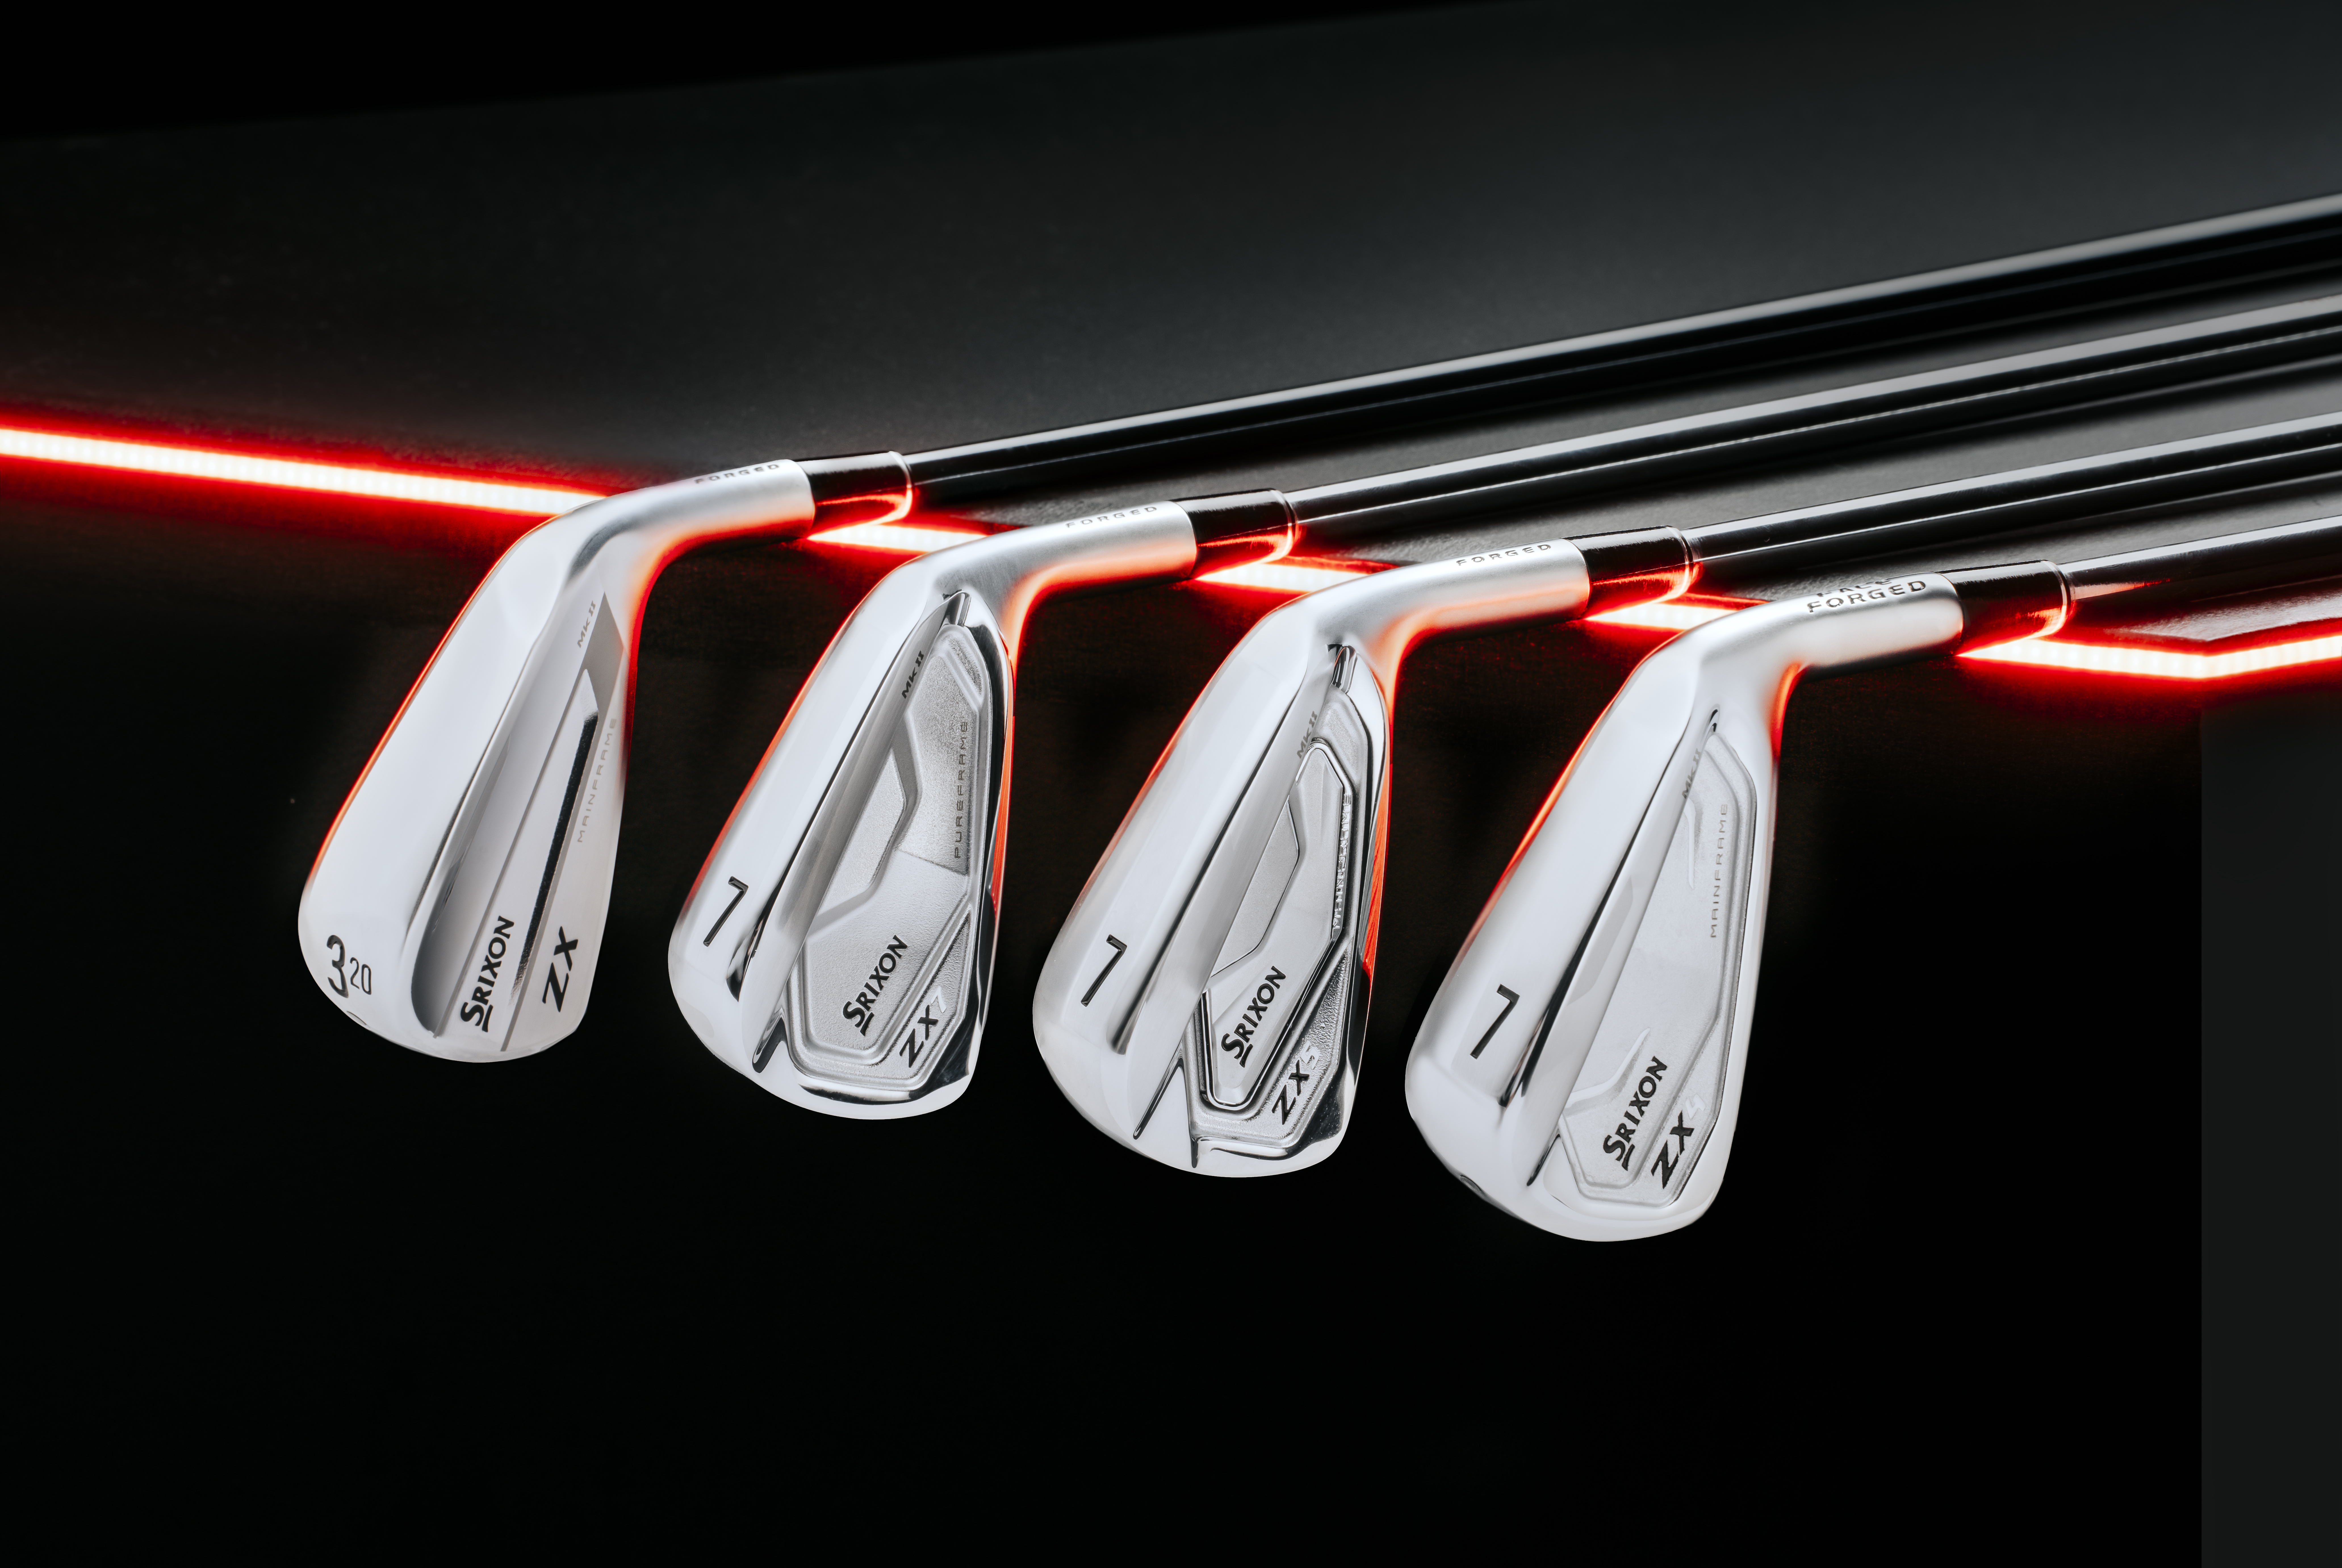 Srixon Z-Series irons: What you need to know | Golf Equipment 